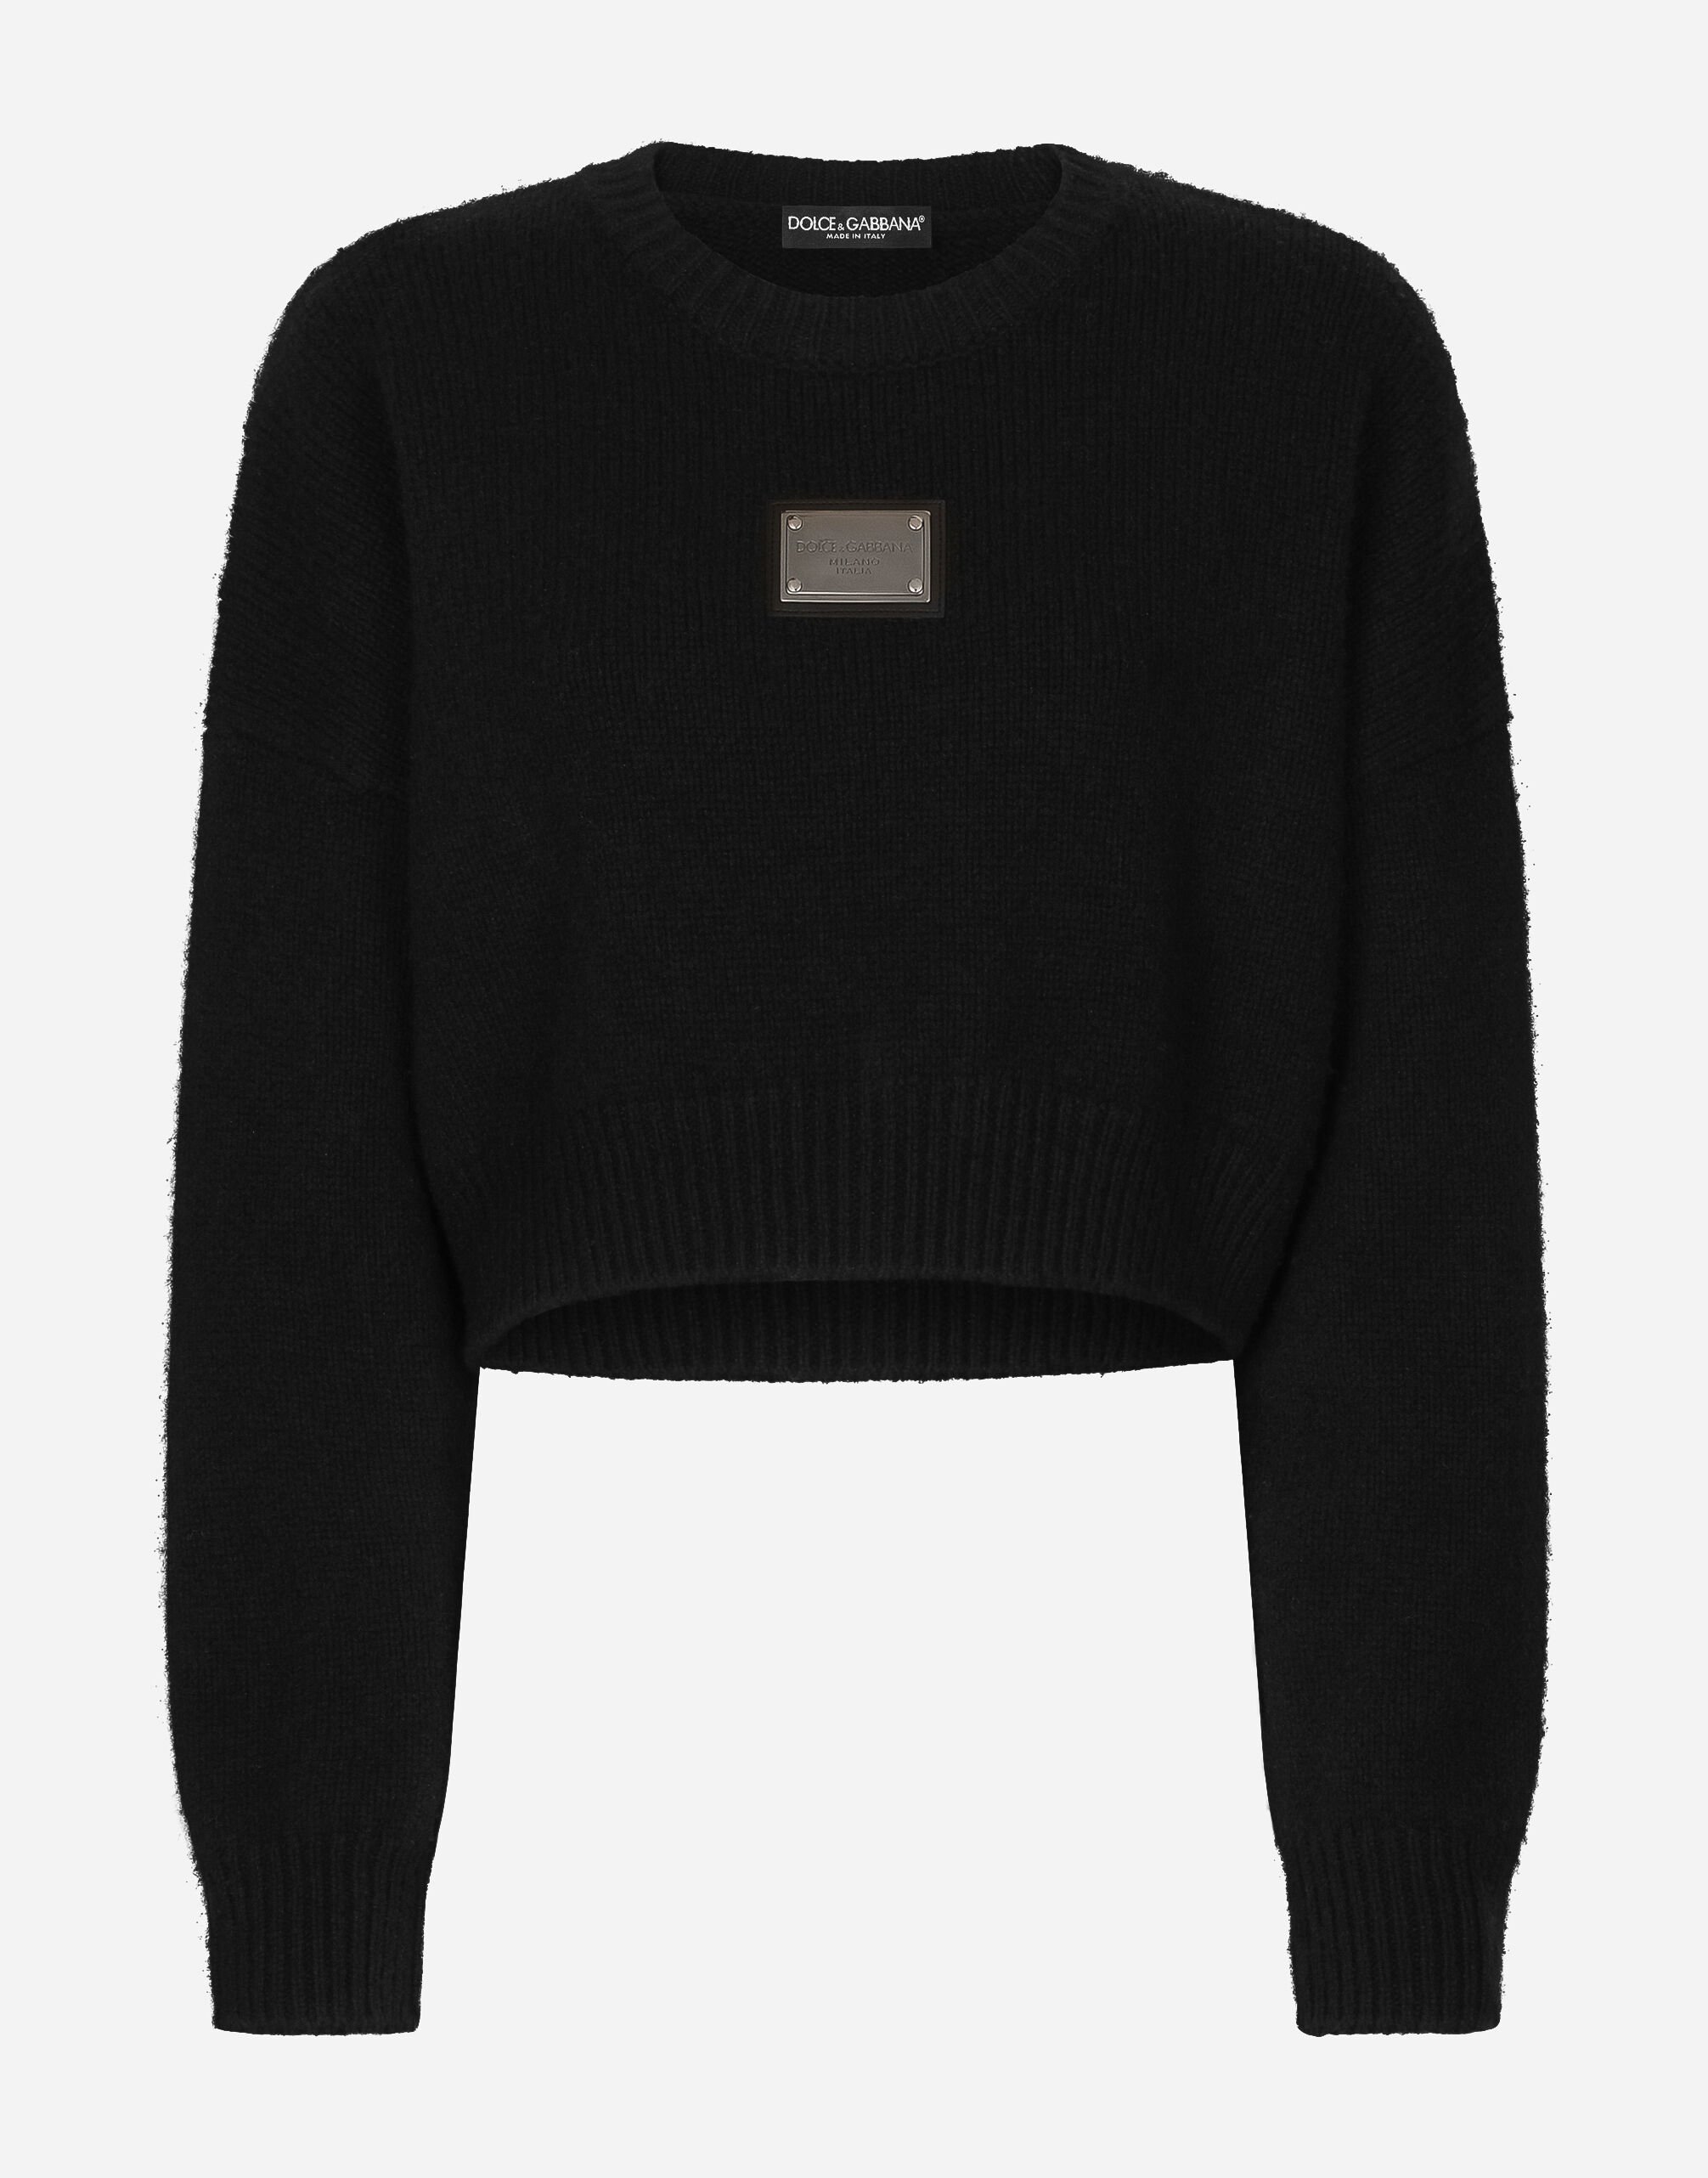 Dolce & Gabbana Wool and cashmere round-neck sweater with logo tag Black FXV15ZJFMBC